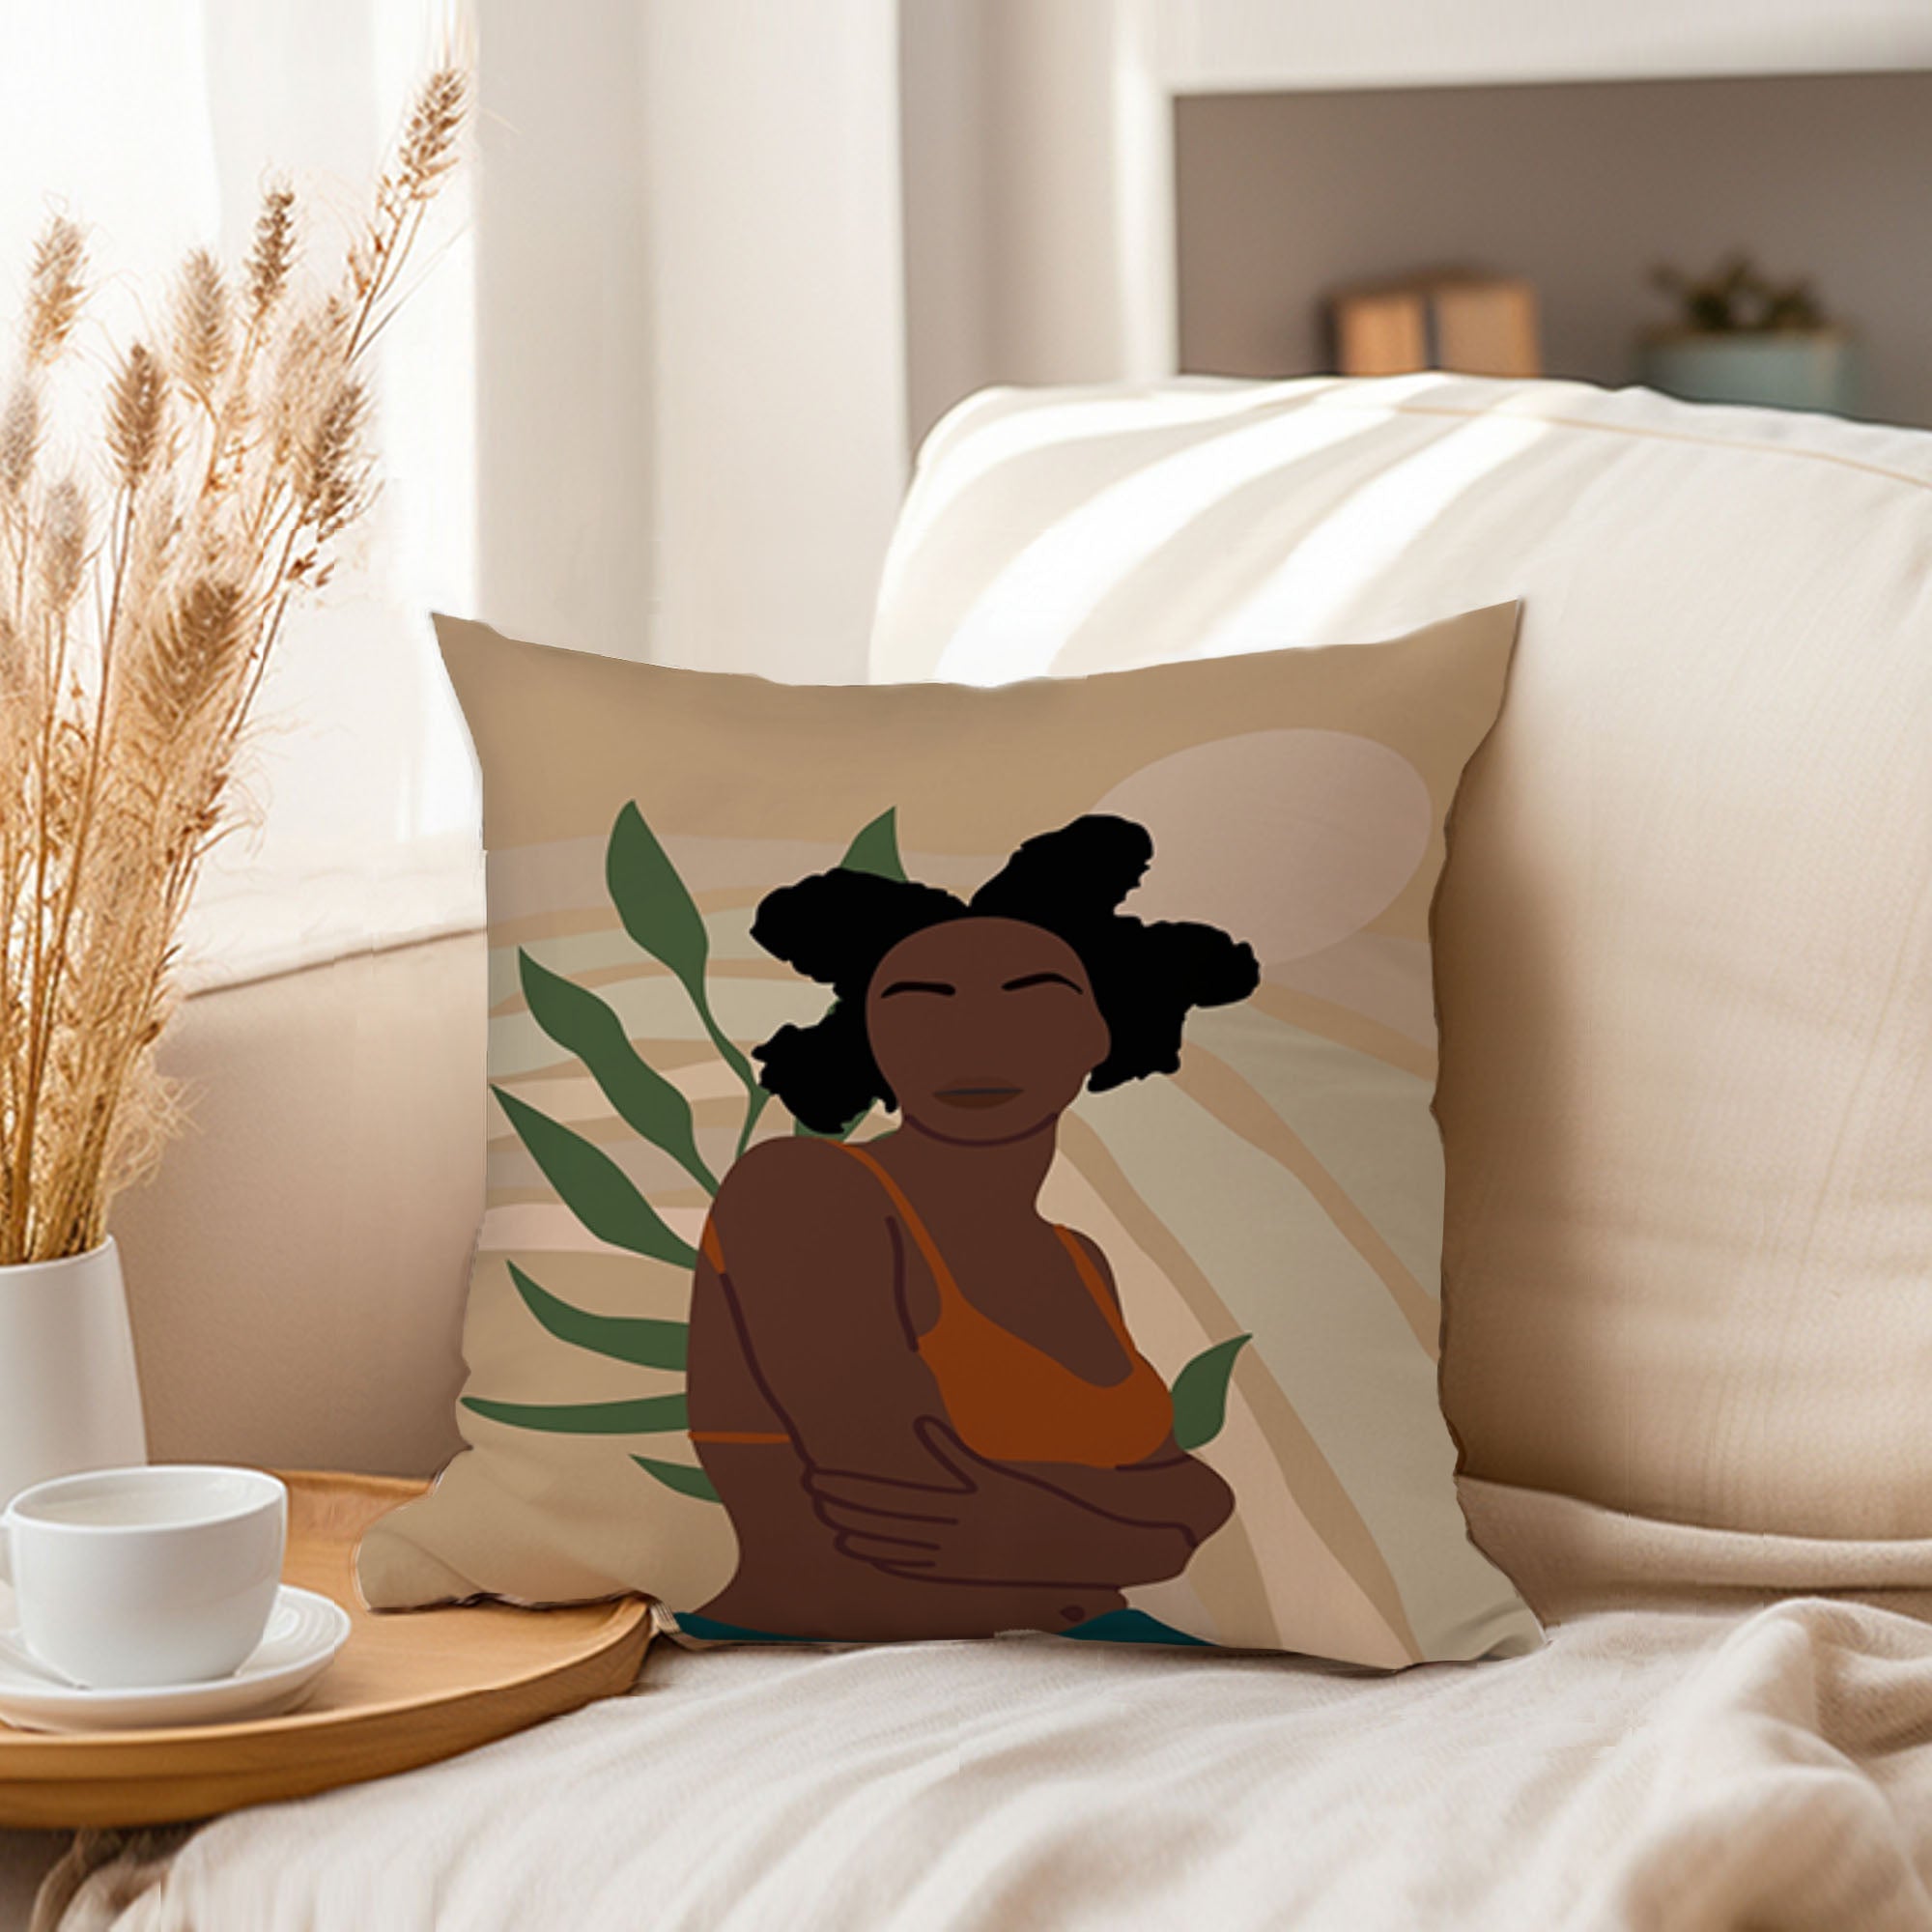 Ethan Taylor People & Portraits Throw Pillow Soft Cushion Cover African American Women Divinely Made Portraits Female Bohemian Decorative Square Accent Pillow Case, 18x18 Inches, Blue, Green - image 3 of 5